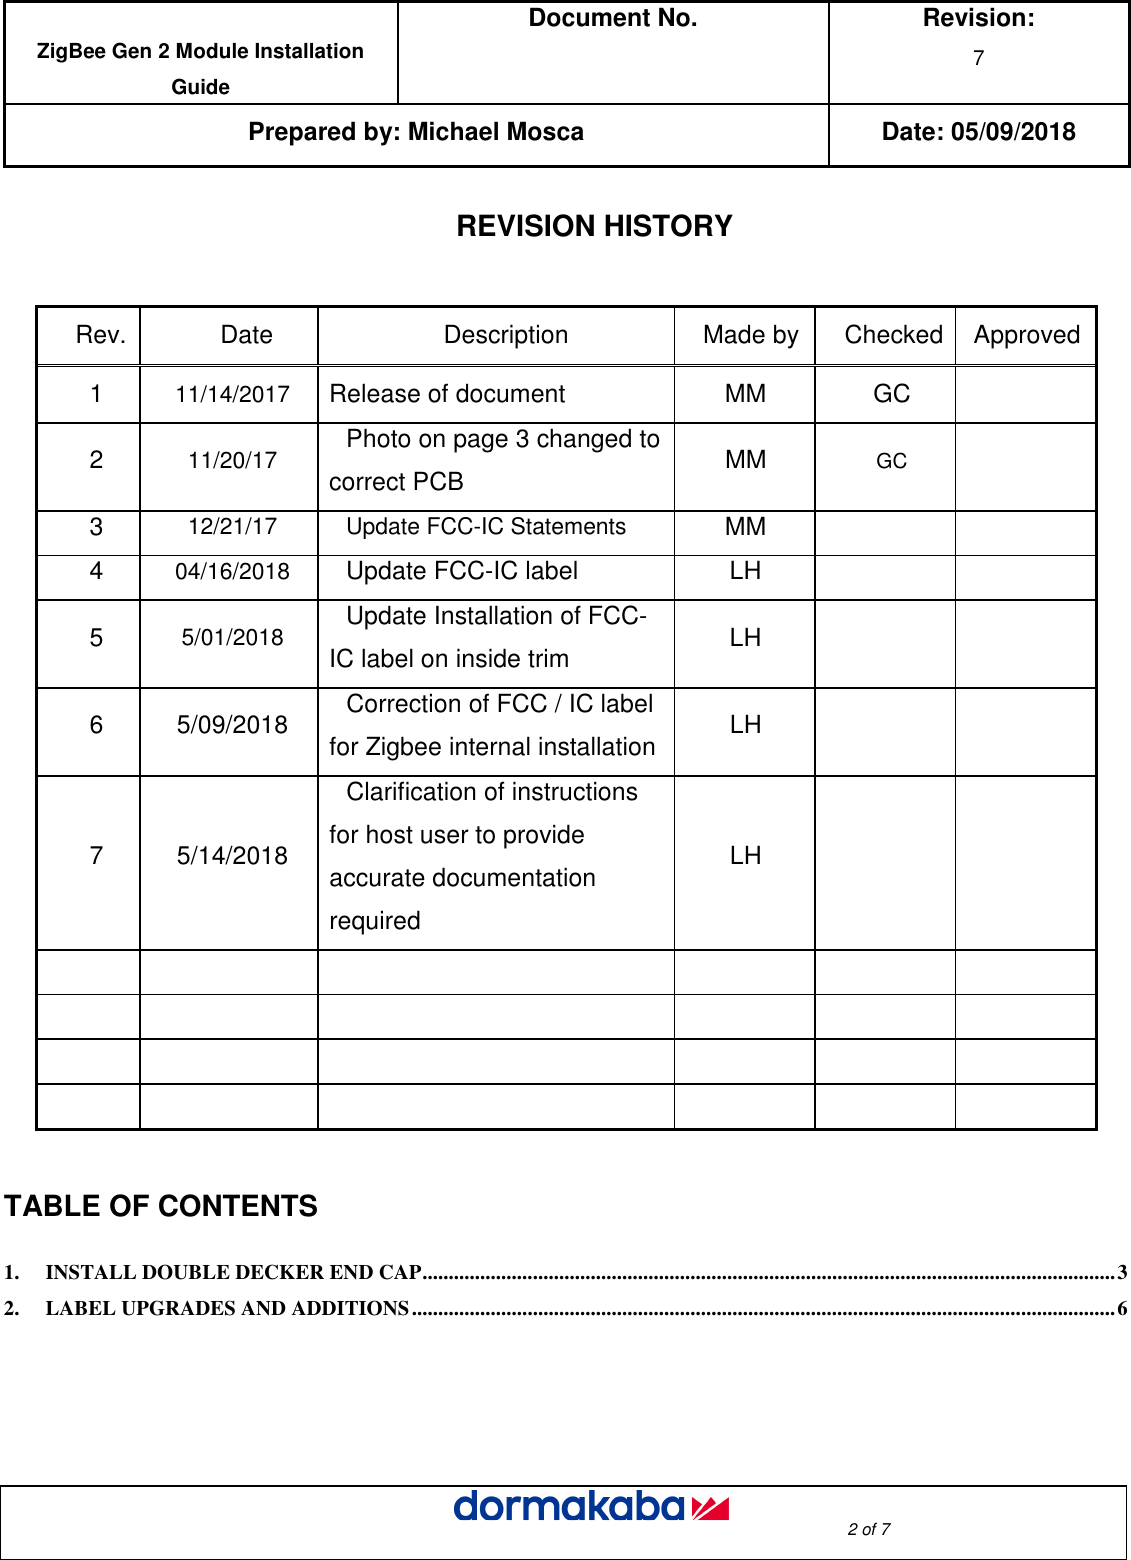  ZigBee Gen 2 Module Installation Guide Document No.  Revision: 7  Prepared by: Michael Mosca Date: 05/09/2018                                                                                                                                                                                                     2 of 7  REVISION HISTORY   Rev. Date  Description  Made by  Checked Approved 1  11/14/2017  Release of document  MM  GC   2  11/20/17  Photo on page 3 changed to correct PCB  MM GC  3  12/21/17  Update FCC-IC Statements  MM     4  04/16/2018  Update FCC-IC label  LH     5  5/01/2018  Update Installation of FCC- IC label on inside trim  LH     6  5/09/2018  Correction of FCC / IC label for Zigbee internal installation  LH     7  5/14/2018 Clarification of instructions for host user to provide accurate documentation required LH                                                  TABLE OF CONTENTS    1. INSTALL DOUBLE DECKER END CAP .................................................................................................................................... 3 2. LABEL UPGRADES AND ADDITIONS ...................................................................................................................................... 6       